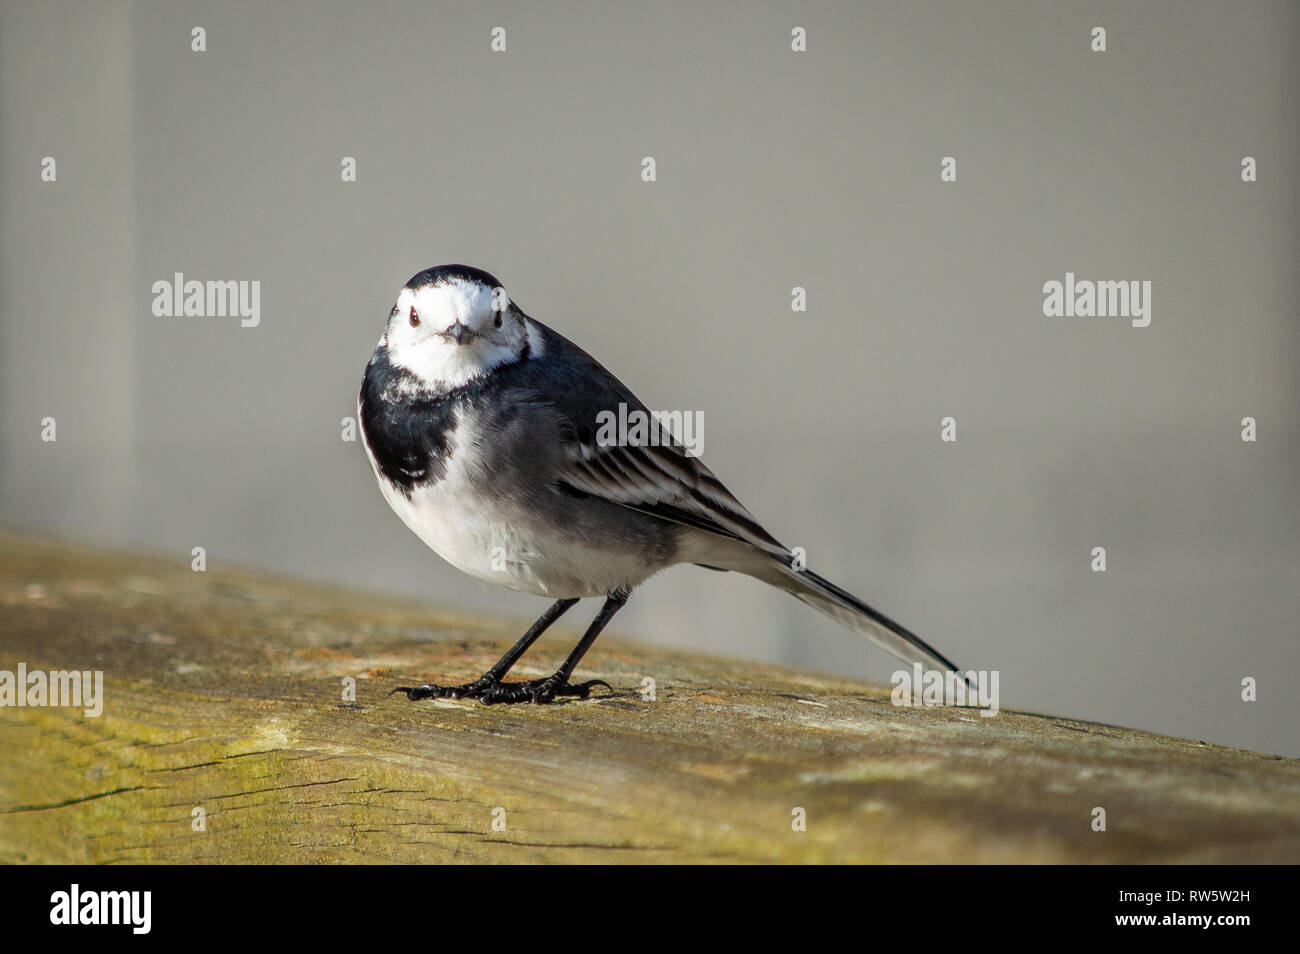 Pied Wagtail on a wooden fence Stock Photo